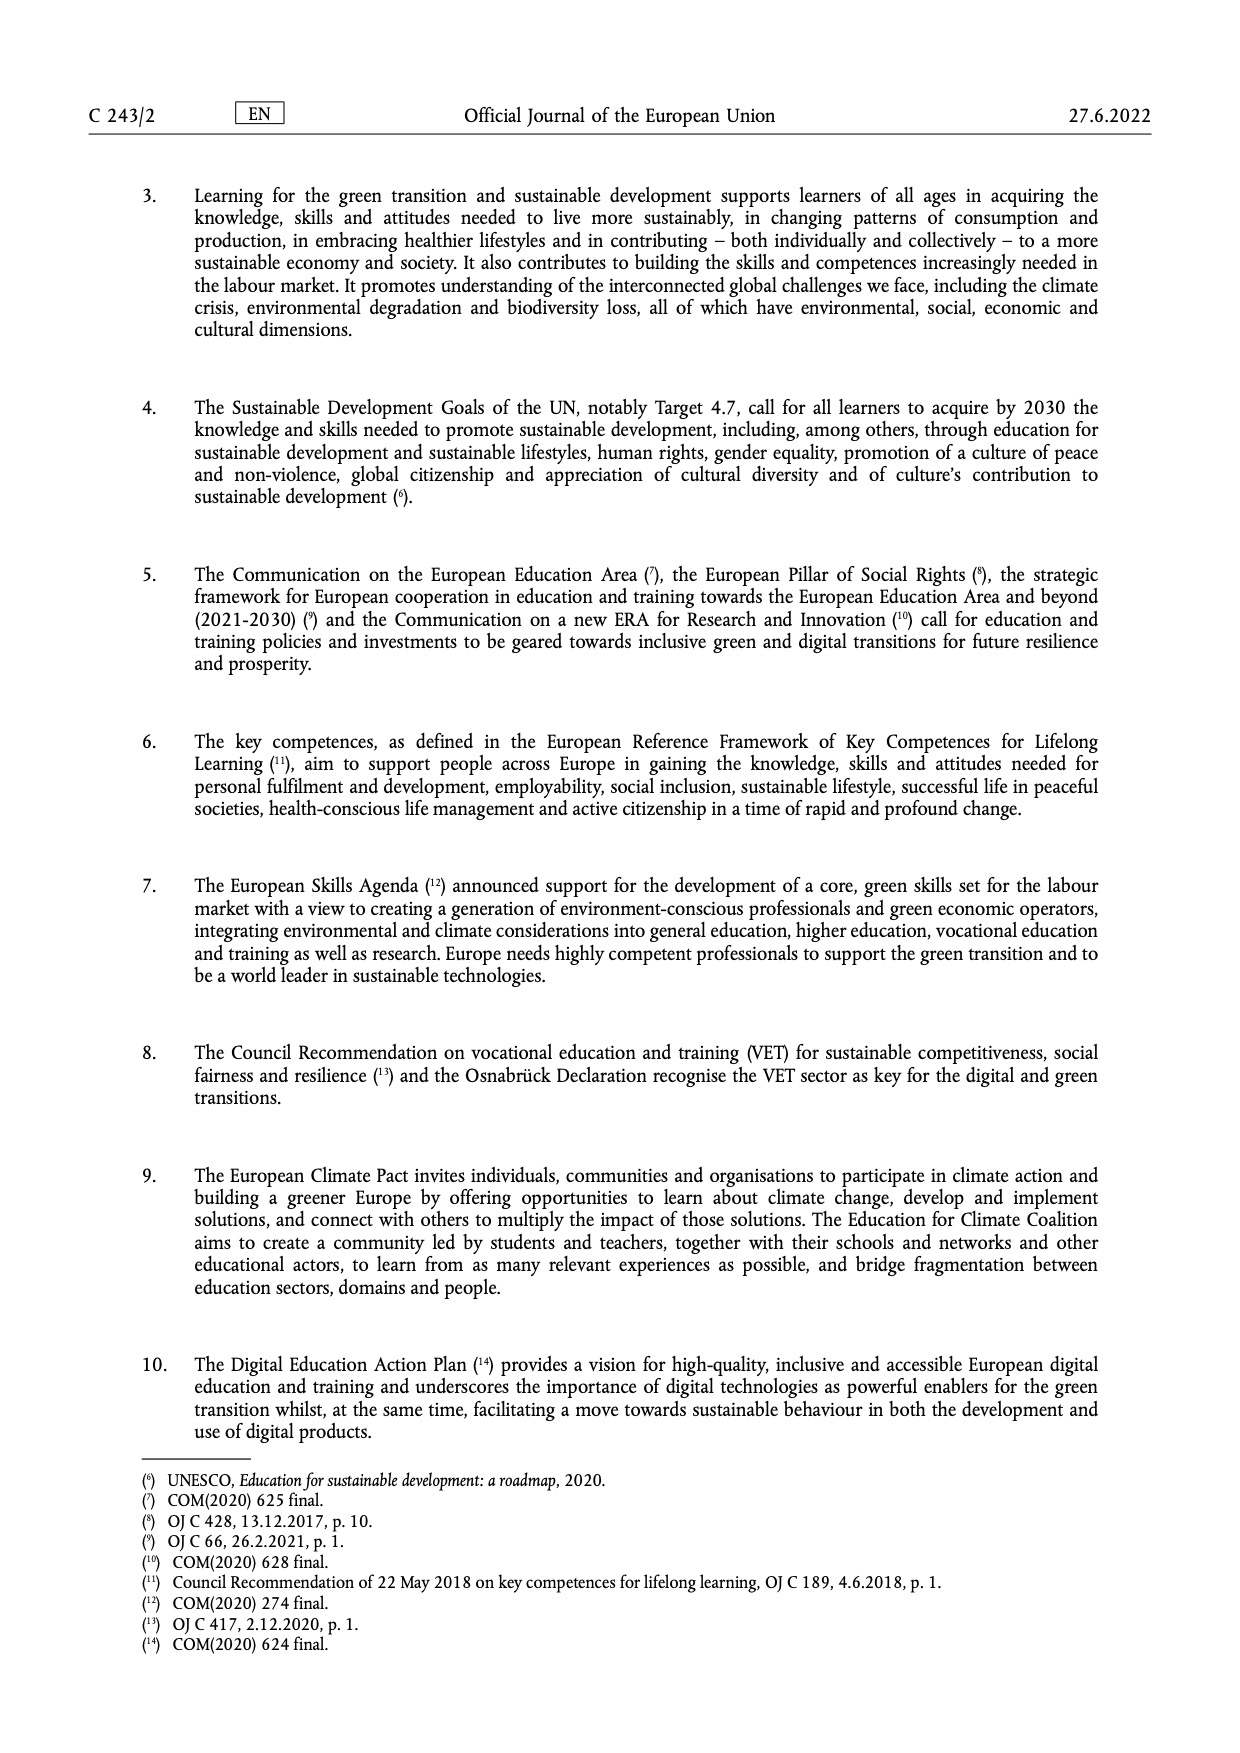 Council recommendation on learning for the green transition and sustainable development 2